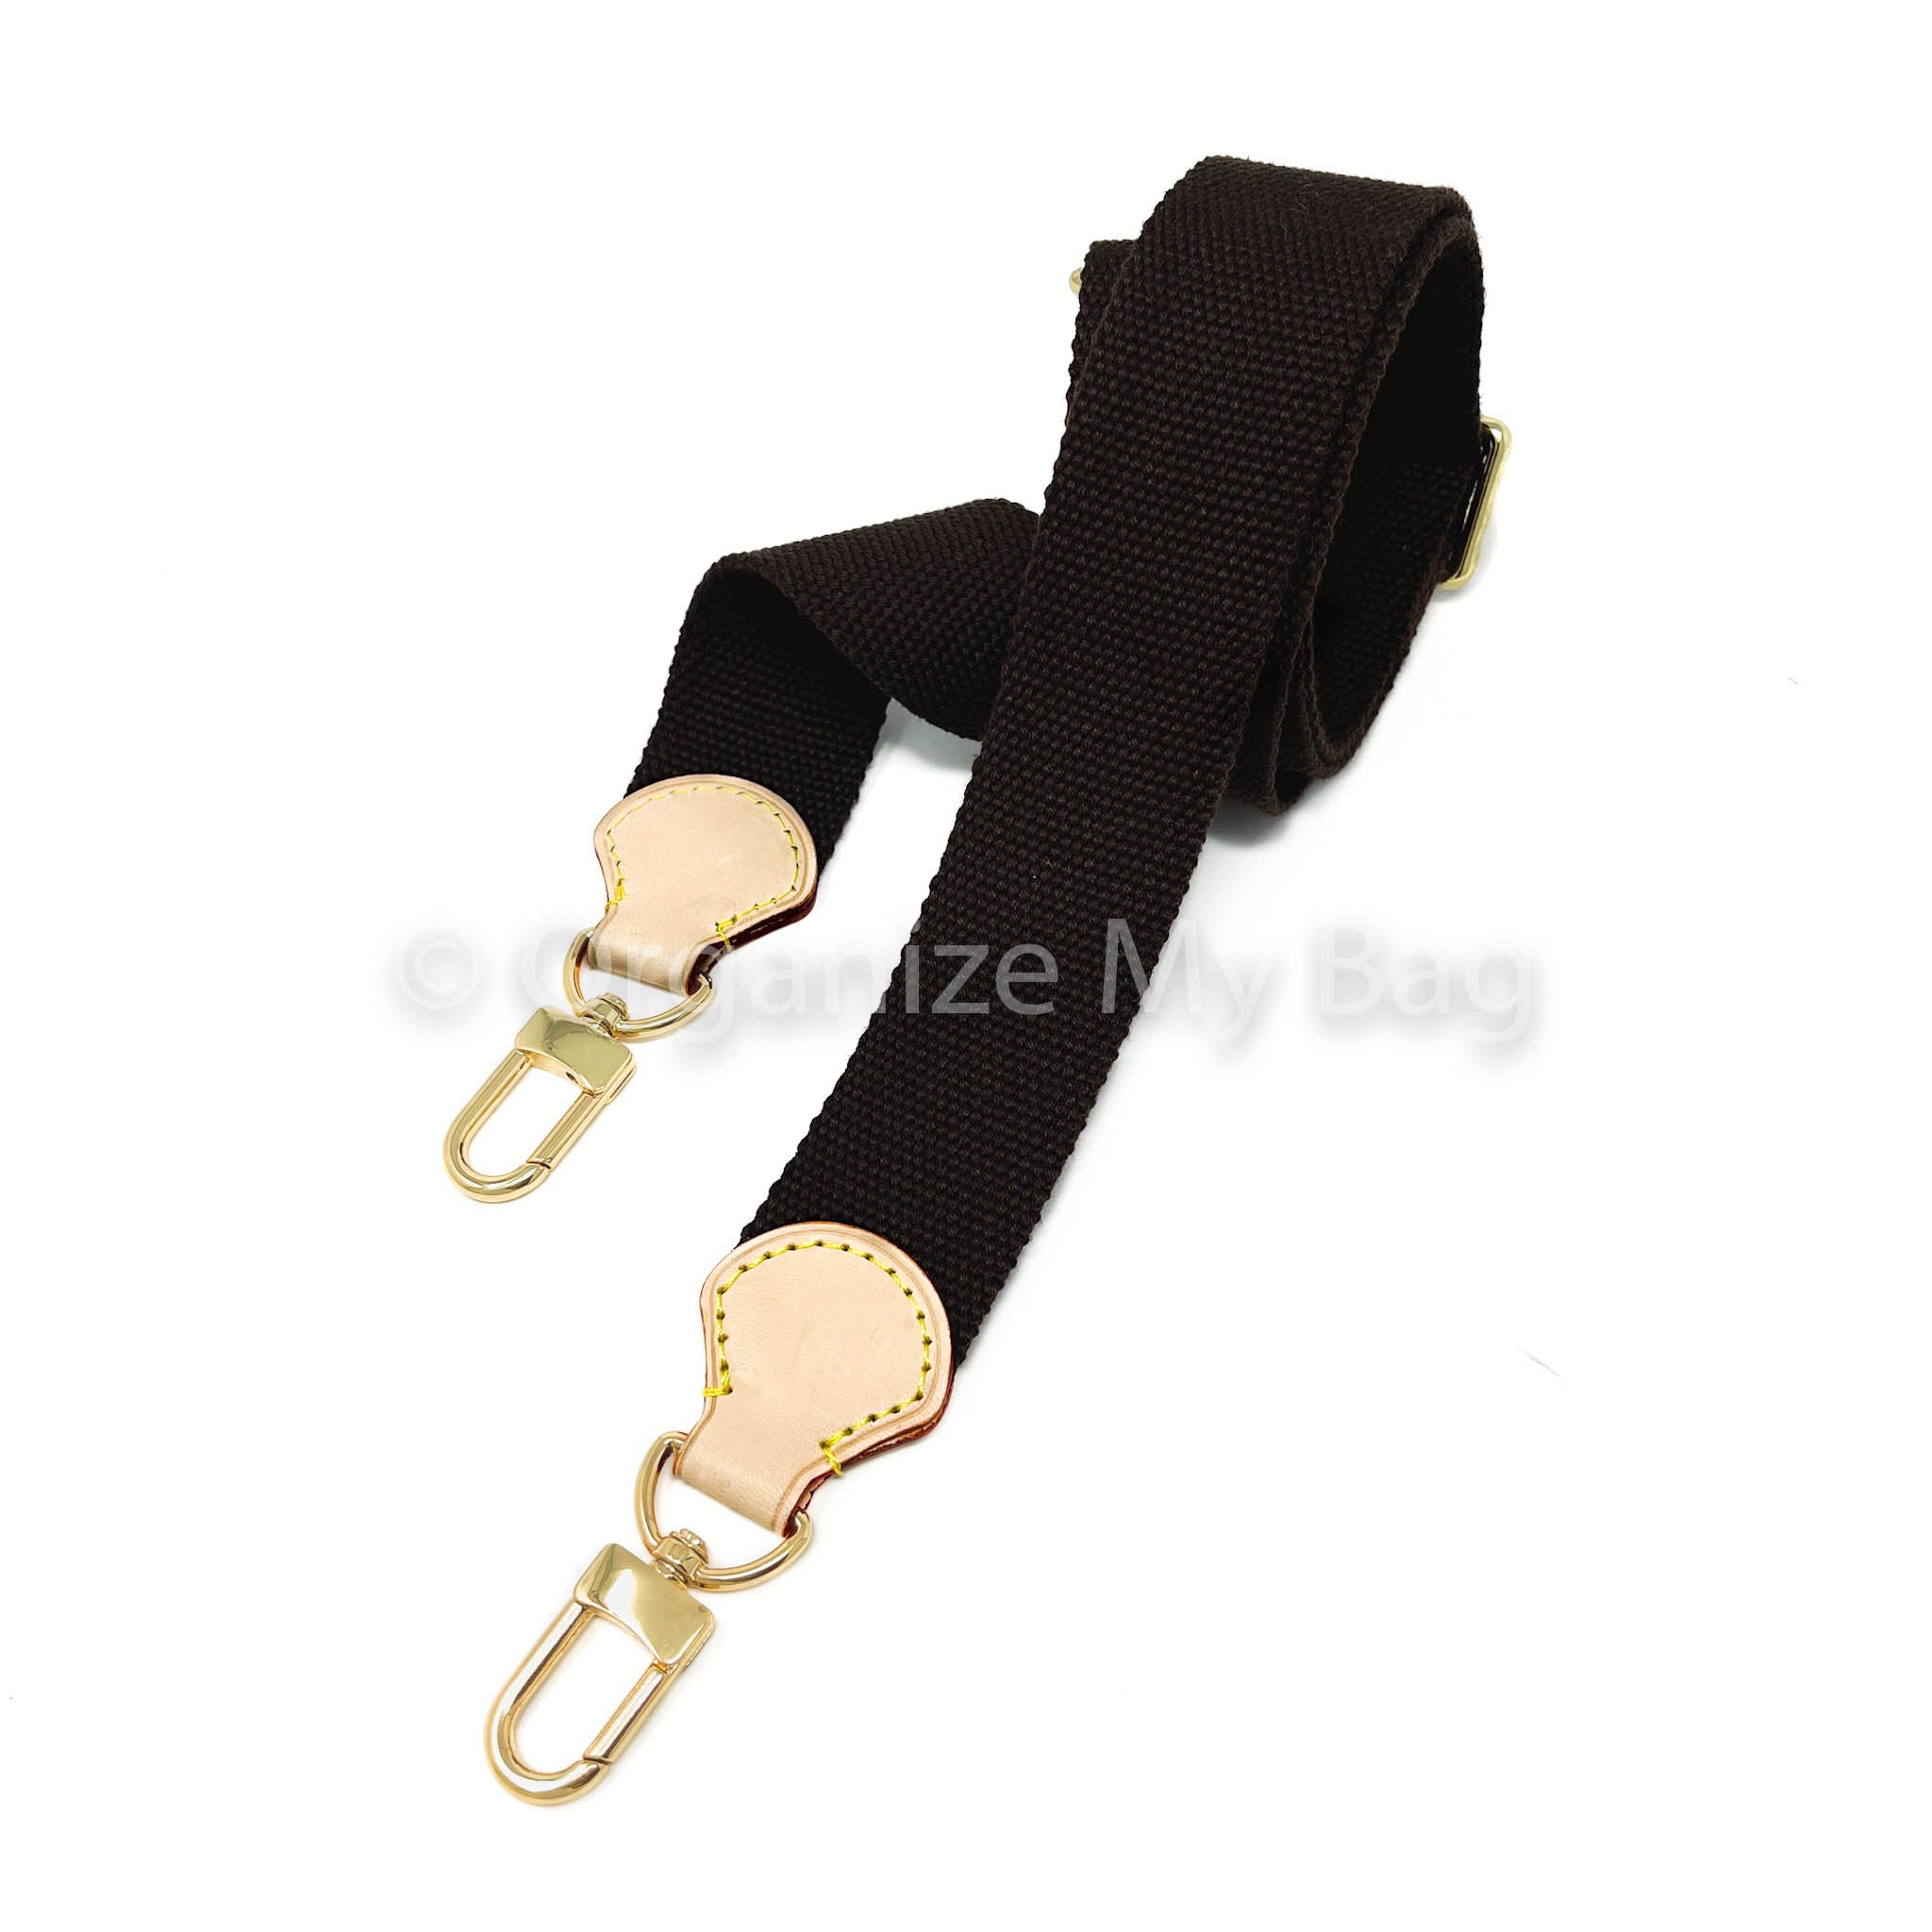 2cm Width - Handbag Strap, Genuine Vachetta Leather, Customized in Any  Length, Designer Tote Bag, Top Handle Purse, Gold Silver Brass Clasps